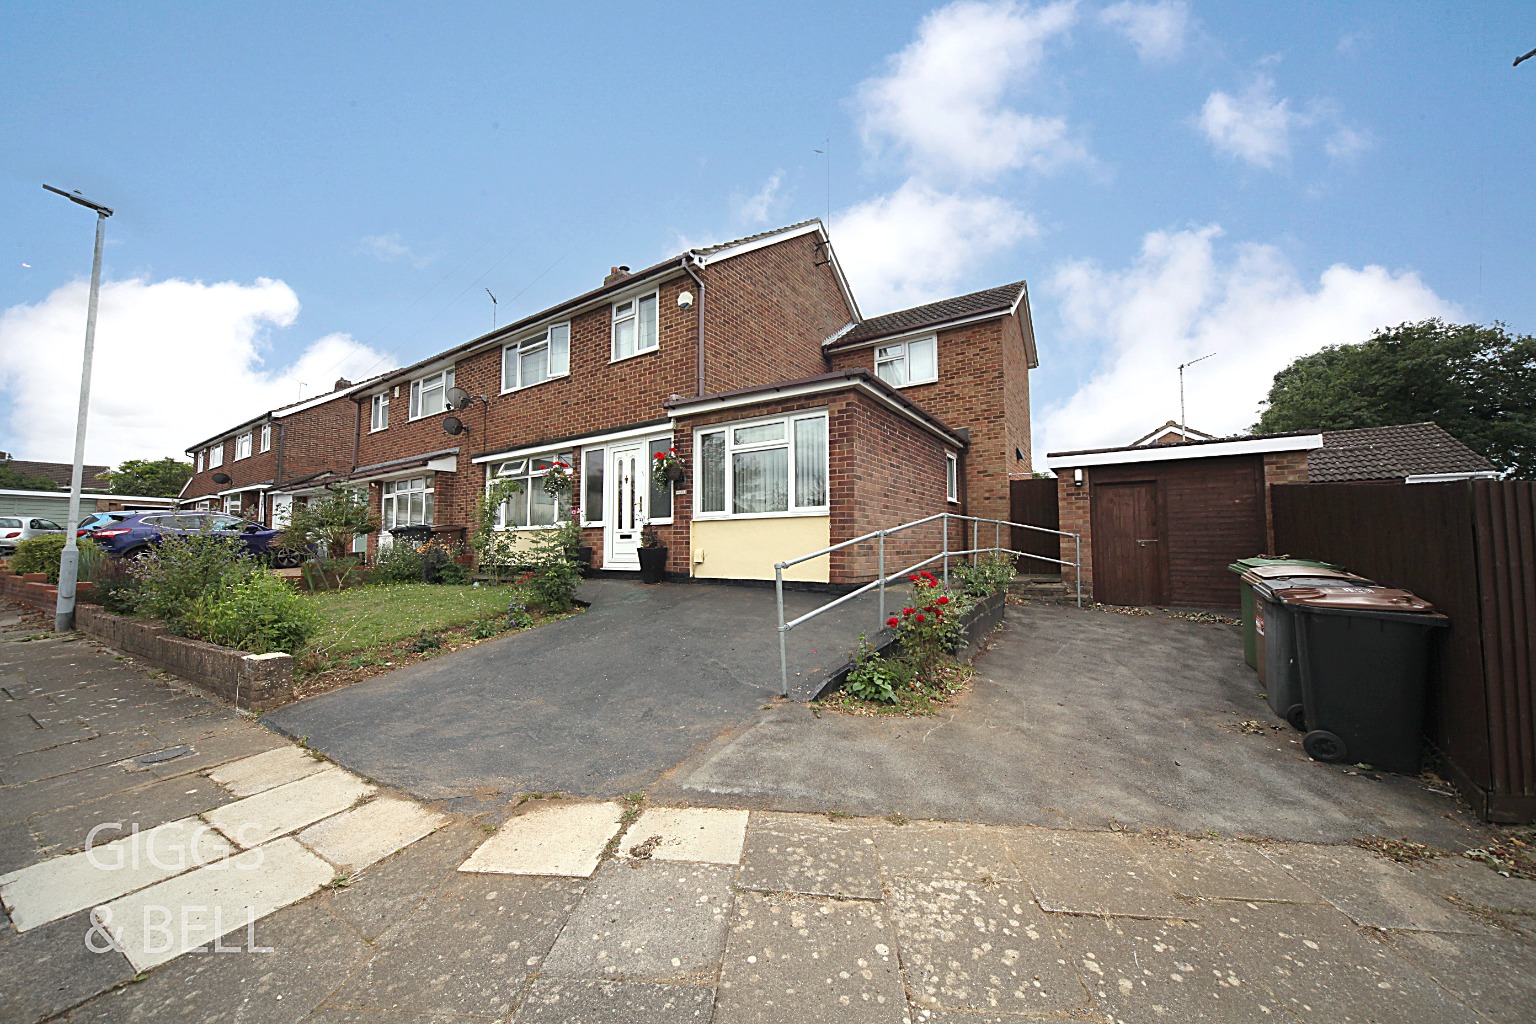 4 bed semi-detached house for sale in Swasedale Road, Luton, LU3 